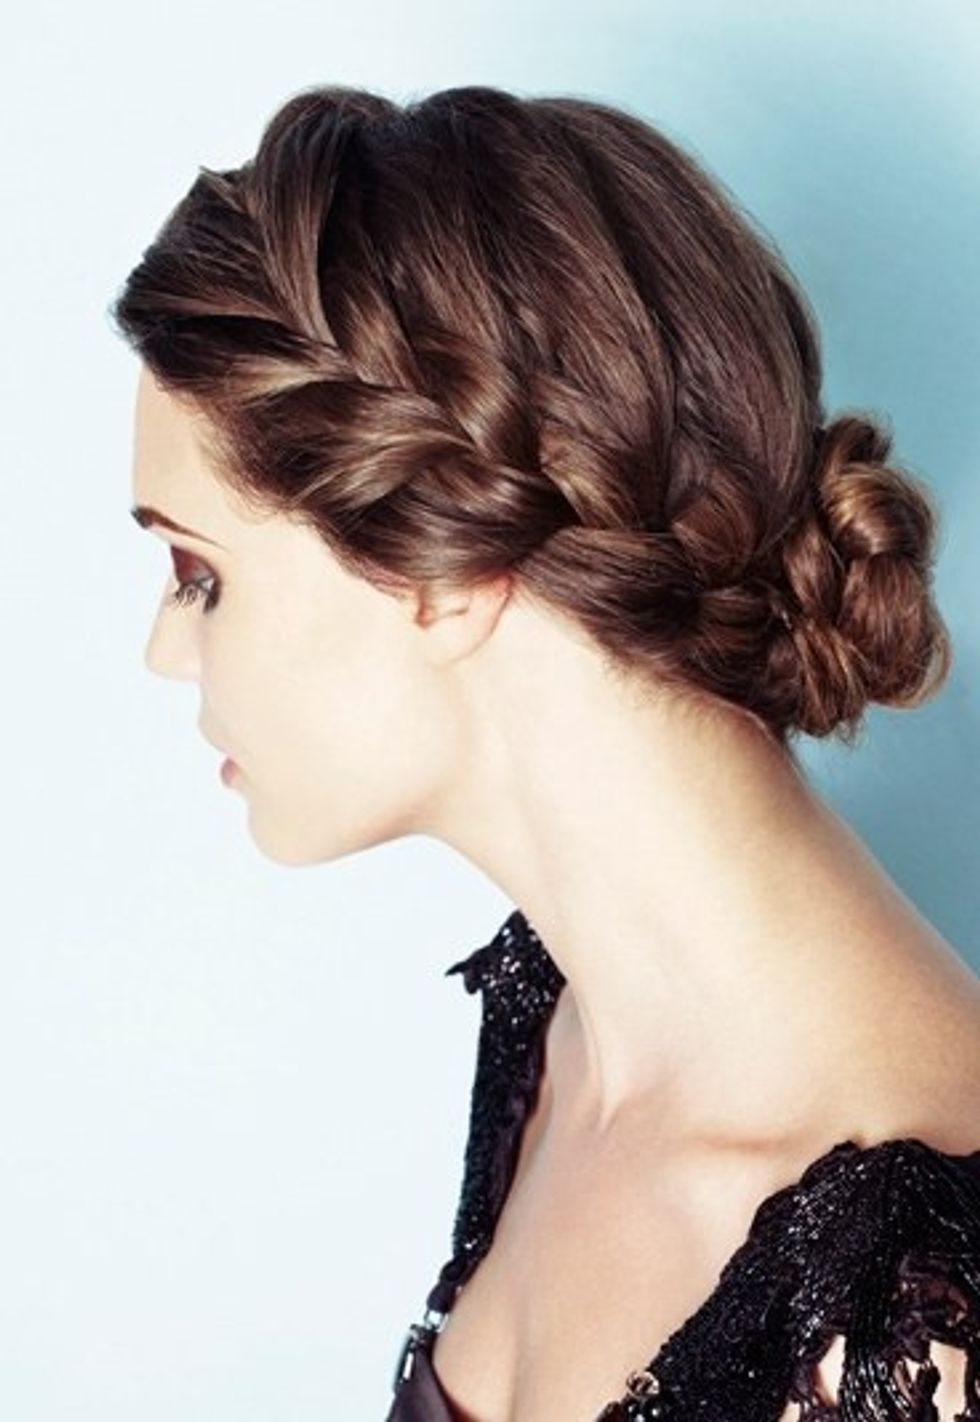 Three Hairstyles to Try this Week!